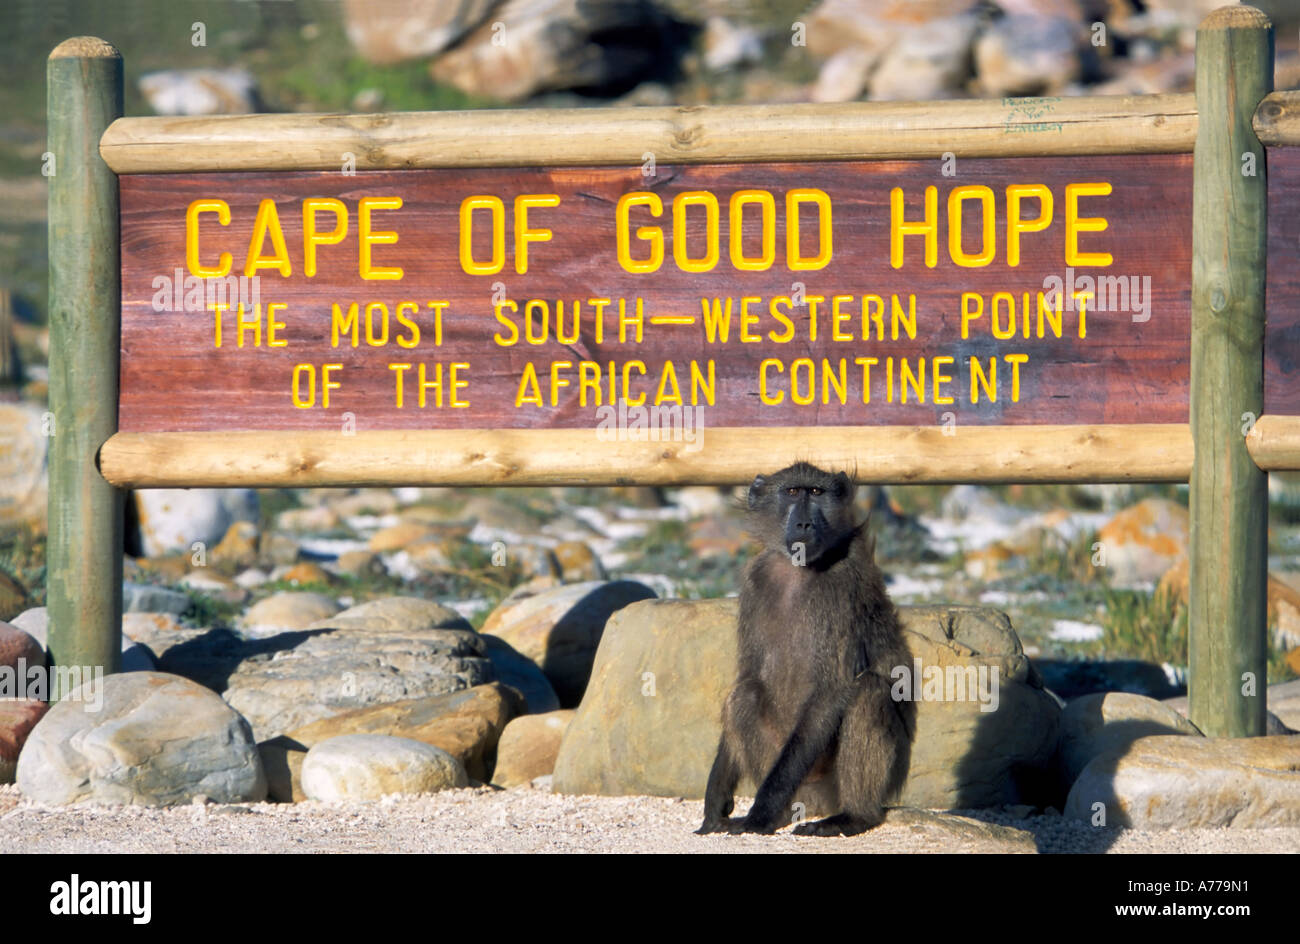 An olive baboon (Papio anubis) sitting by the Cape of Good Hope sign. Stock Photo